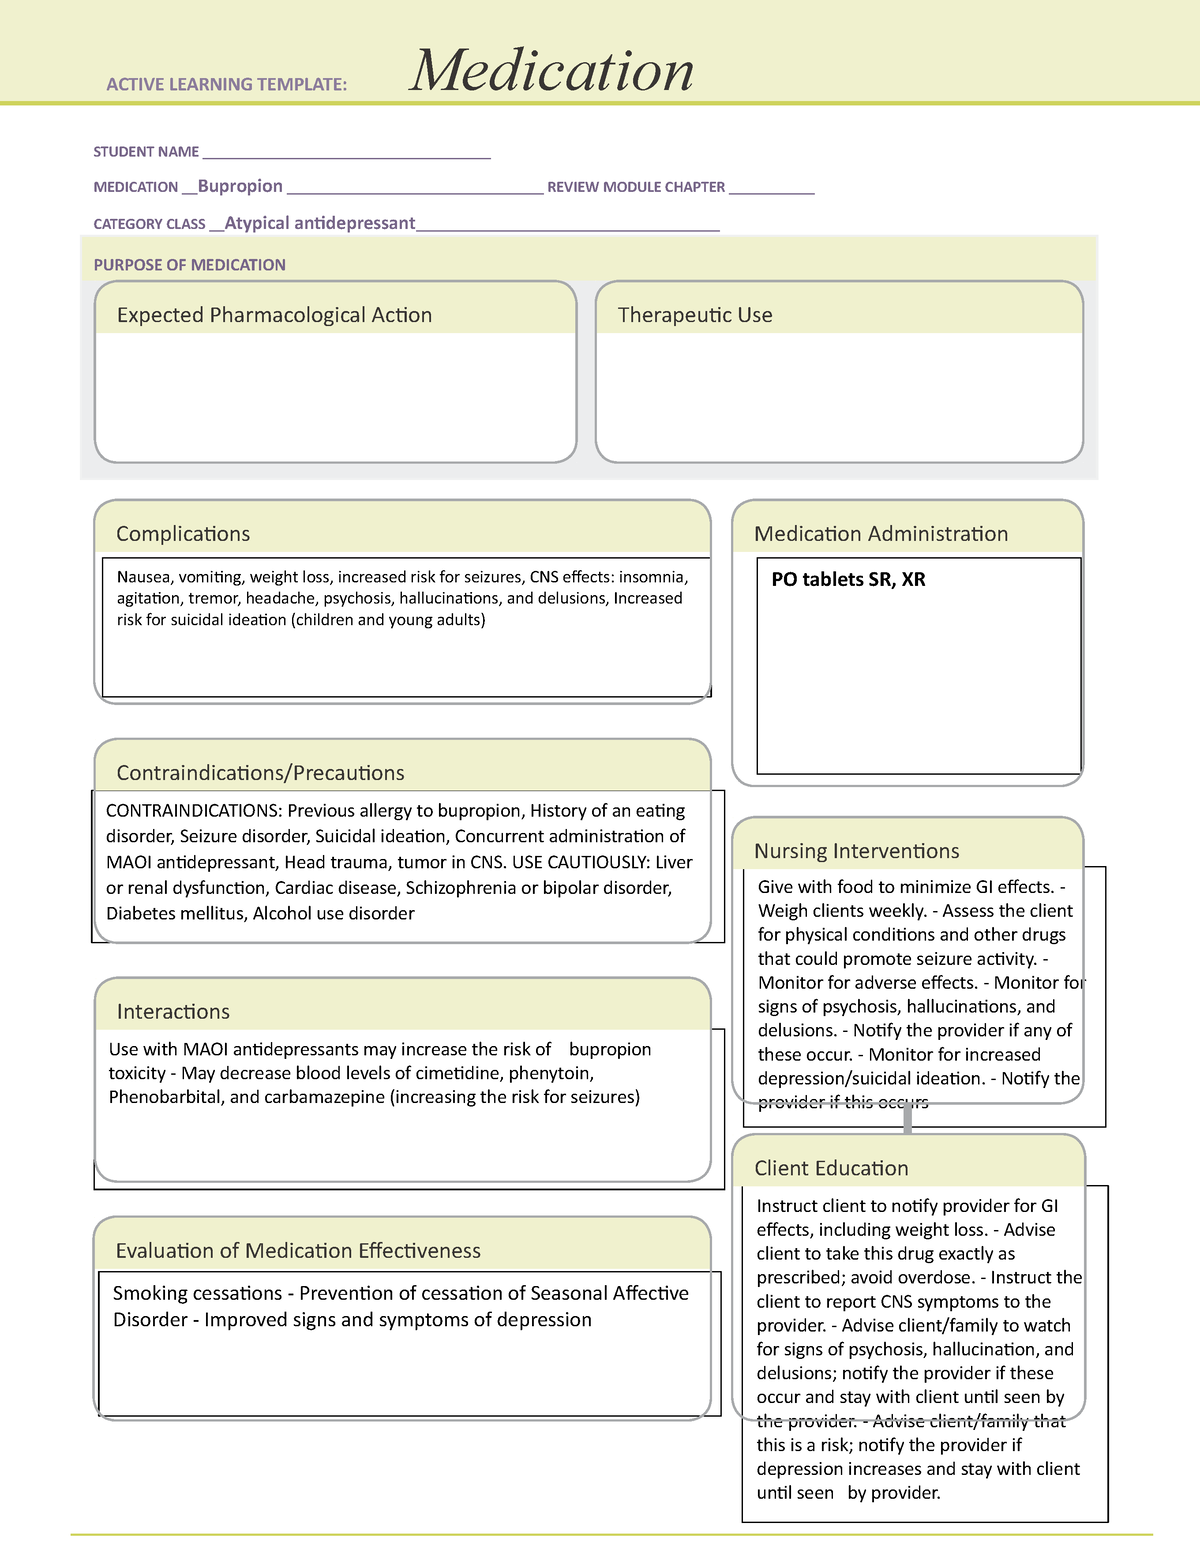 buproprion-ati-medication-template-for-bupropion-for-reference-use-only-student-name-studocu